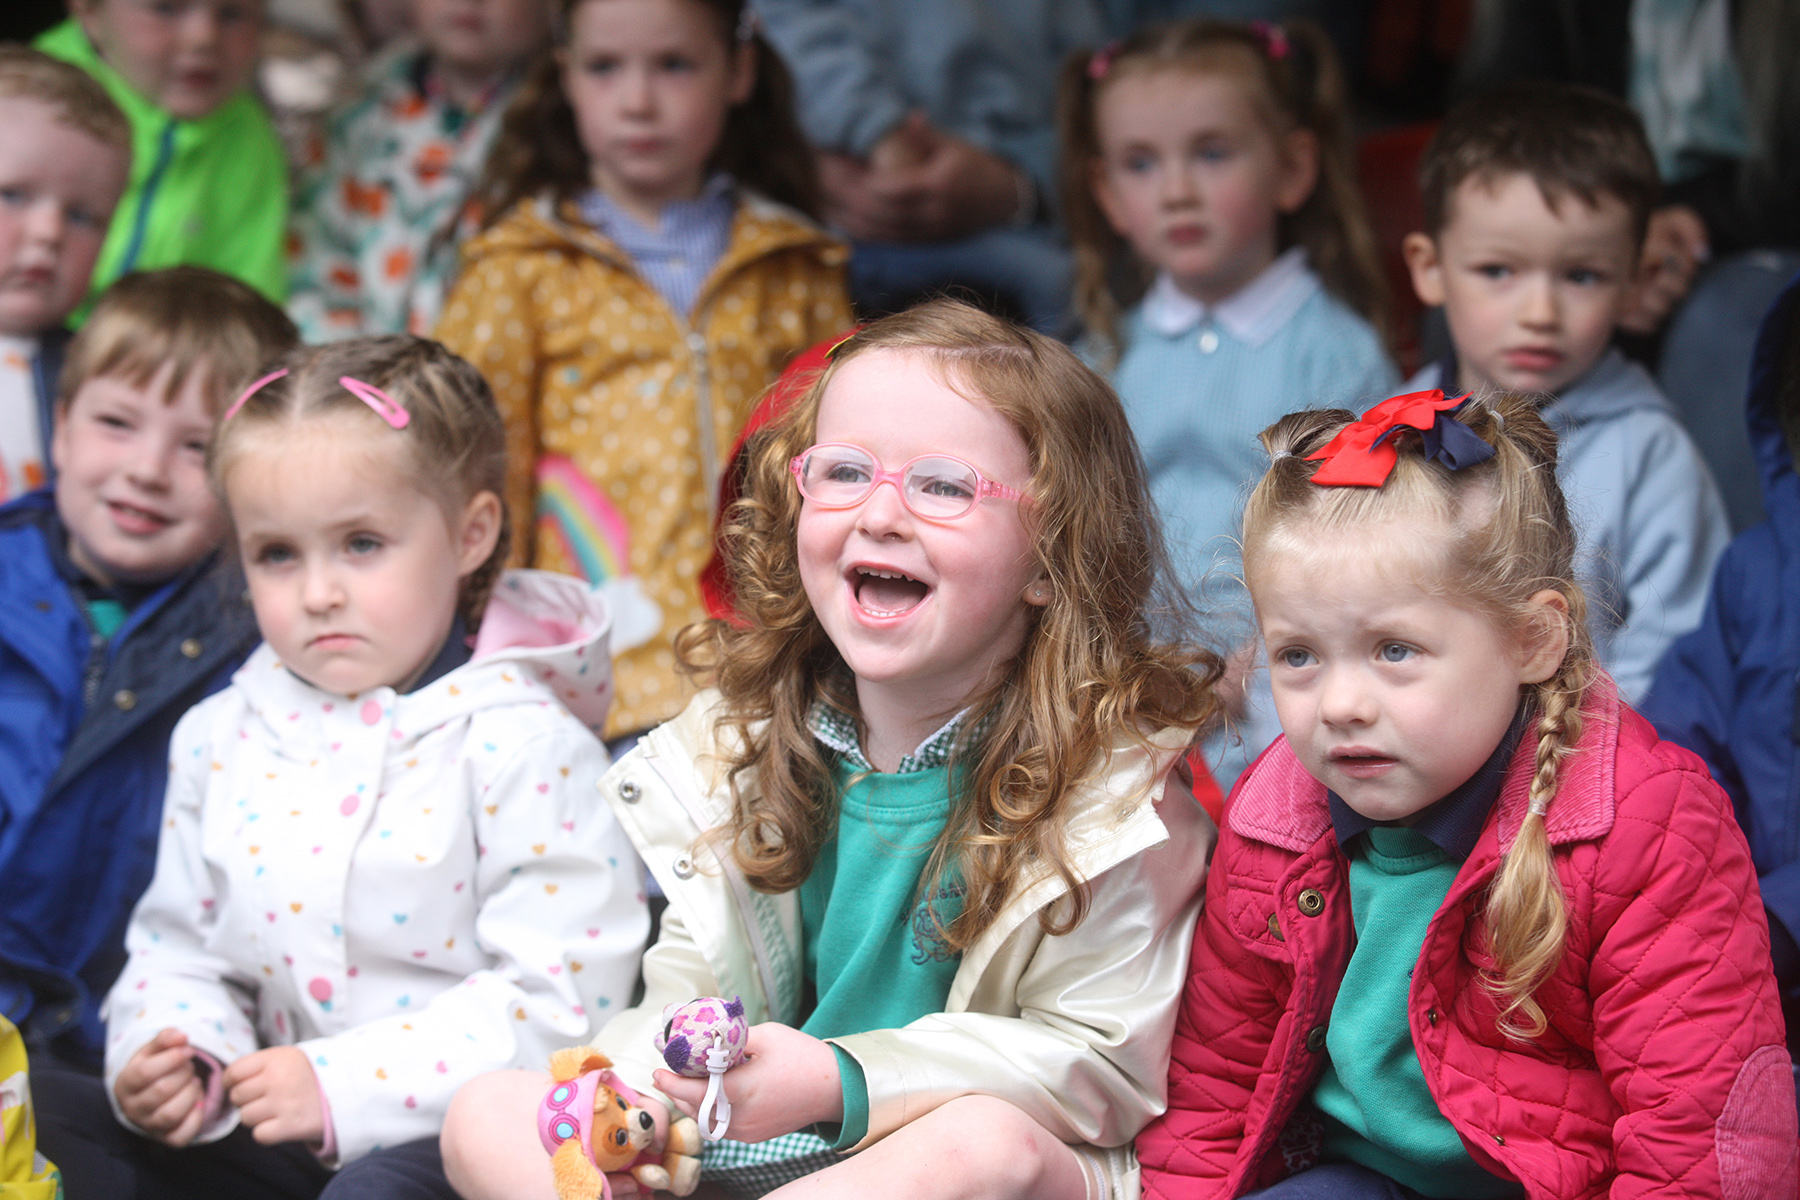 LAUGHTER: Official opening of new outdoor facilities in St. Michael's Nursery School